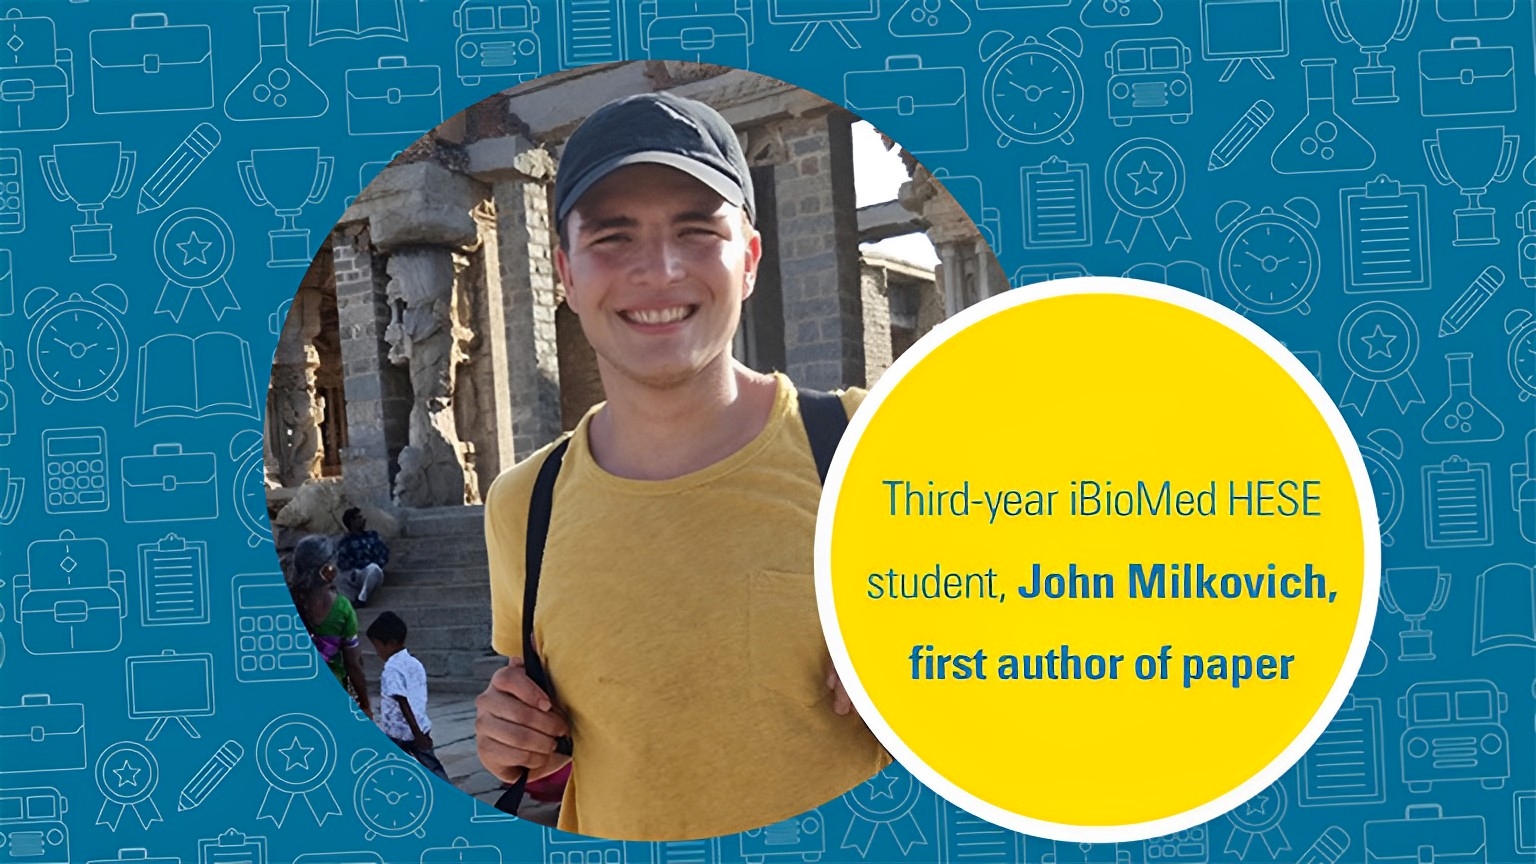 John Milkovich smiles. The text says third-year iBioMed HESE student, John Milkovich, first author of paper.